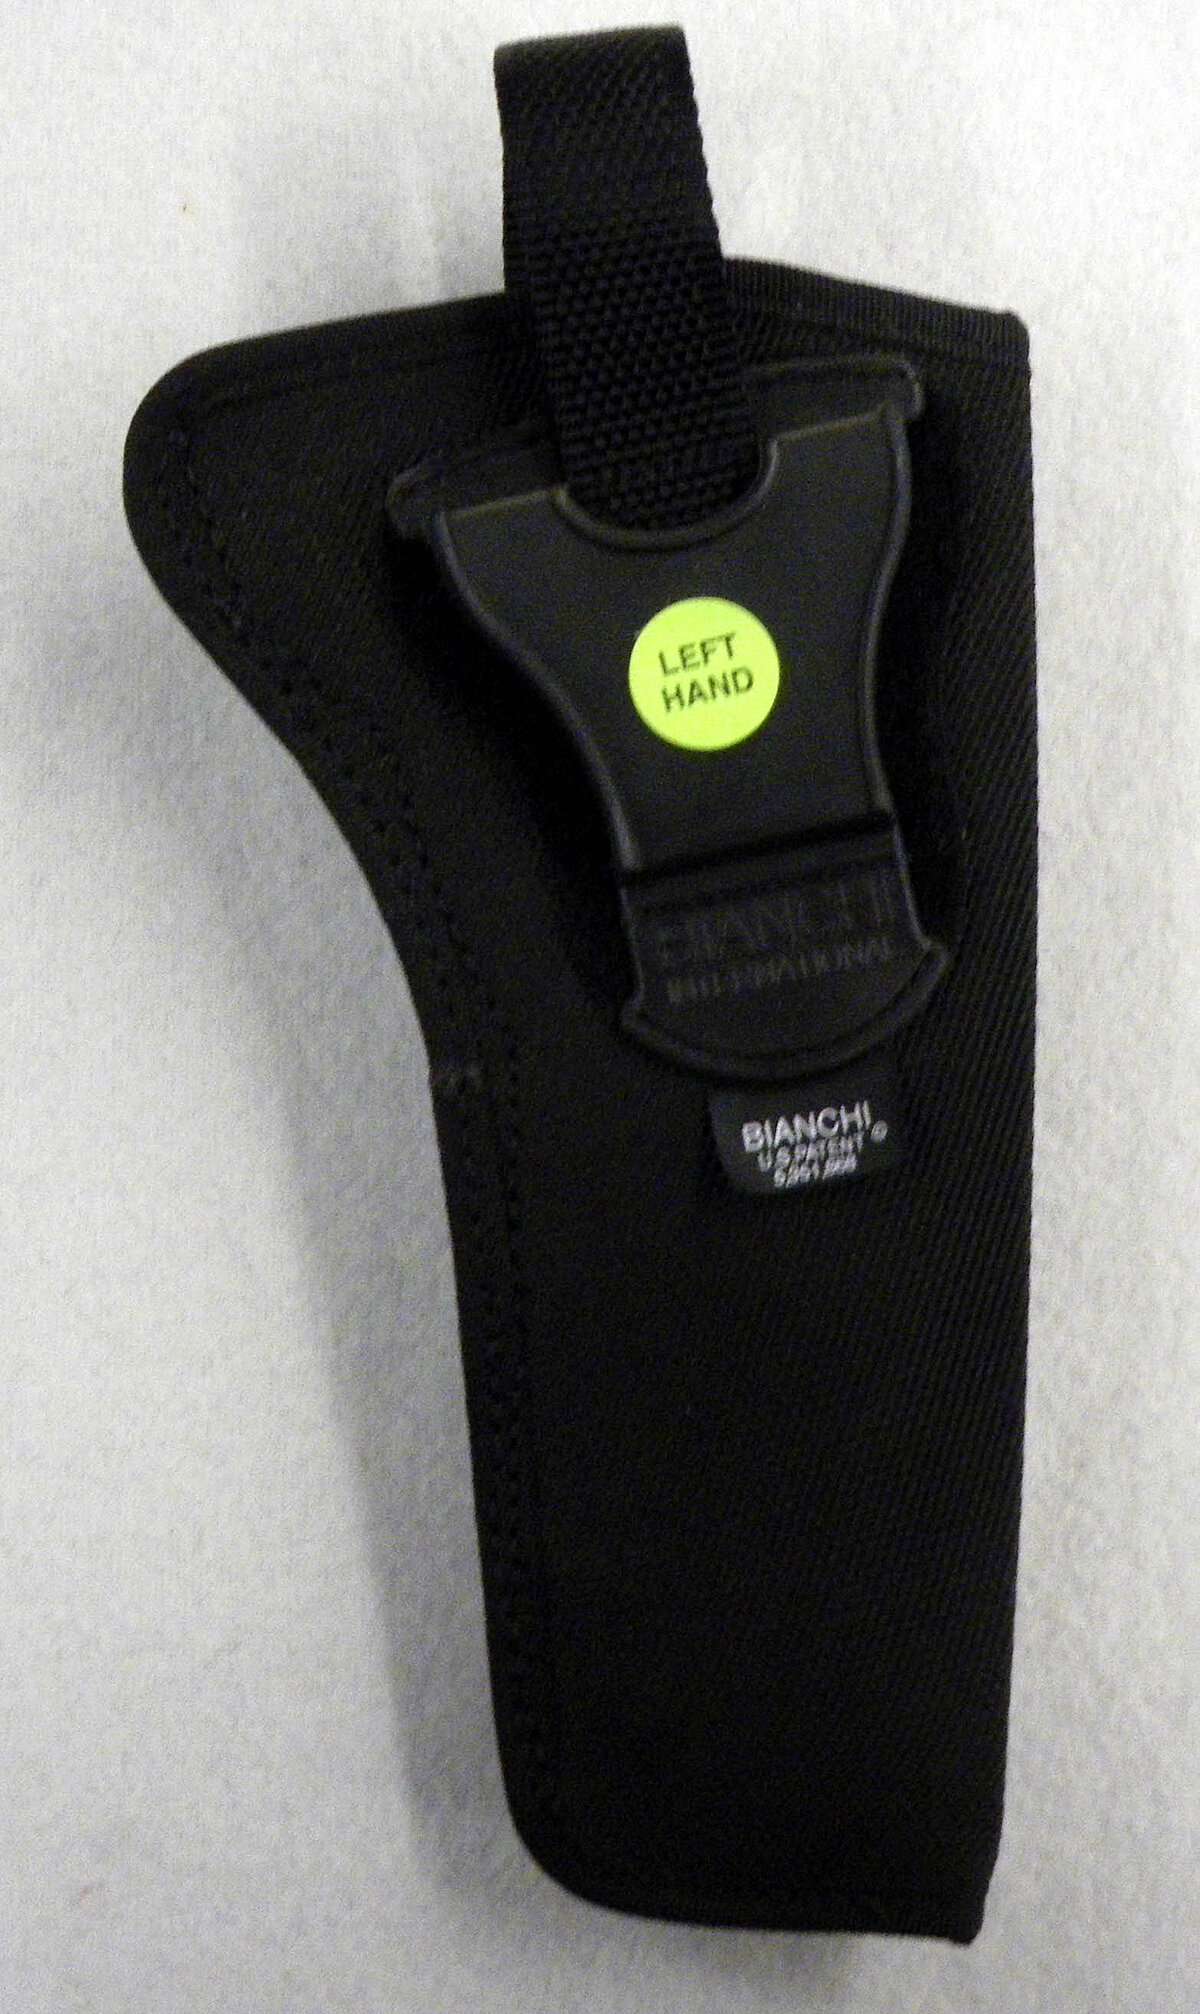 BIANCHI Accumold Holster Mod. 7000 Size 5 links